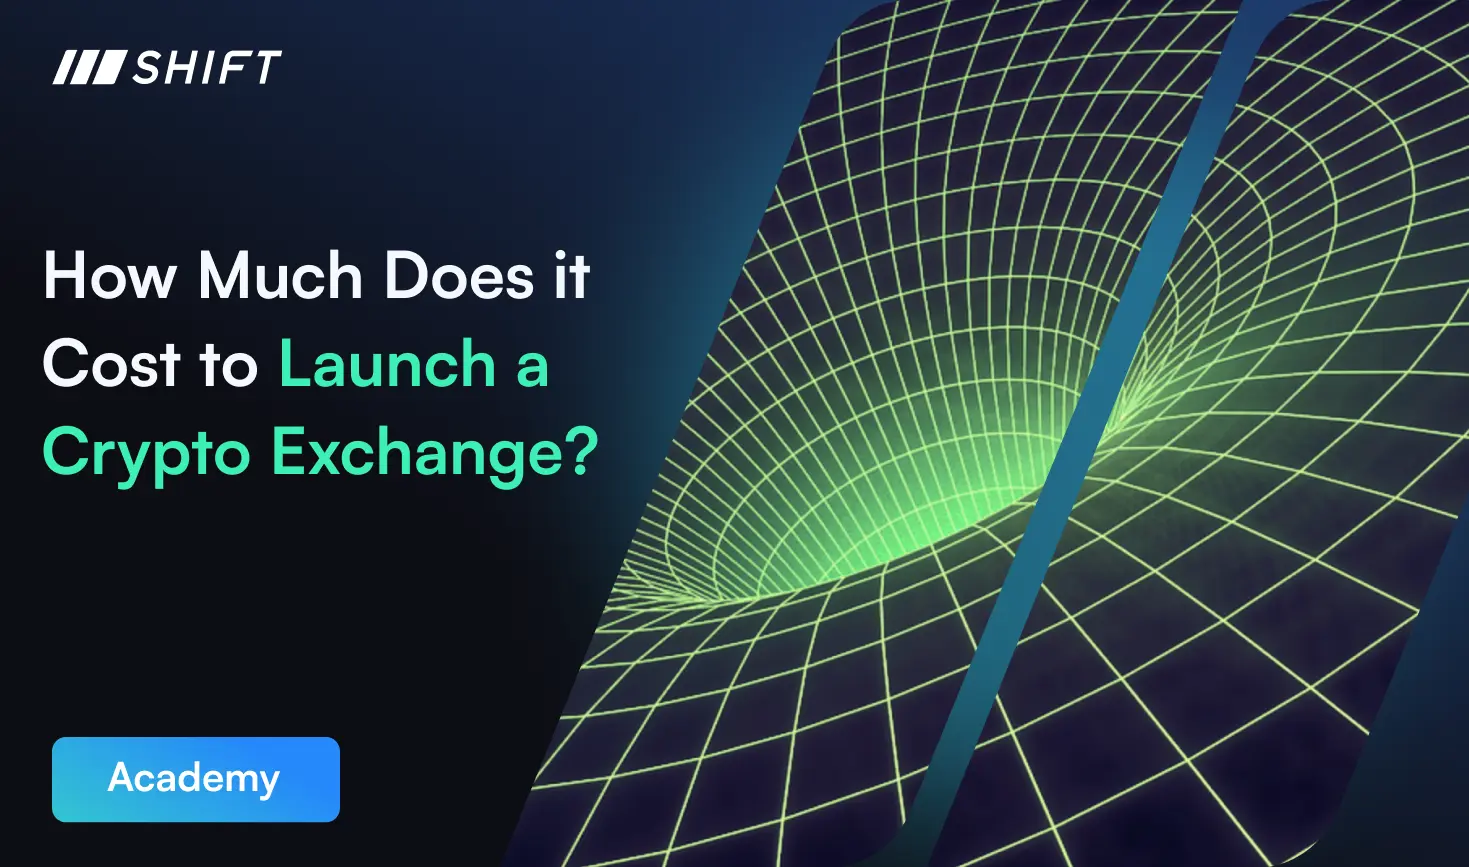 Learn the cost of launching a crypto exchange platform with Shift Markets.